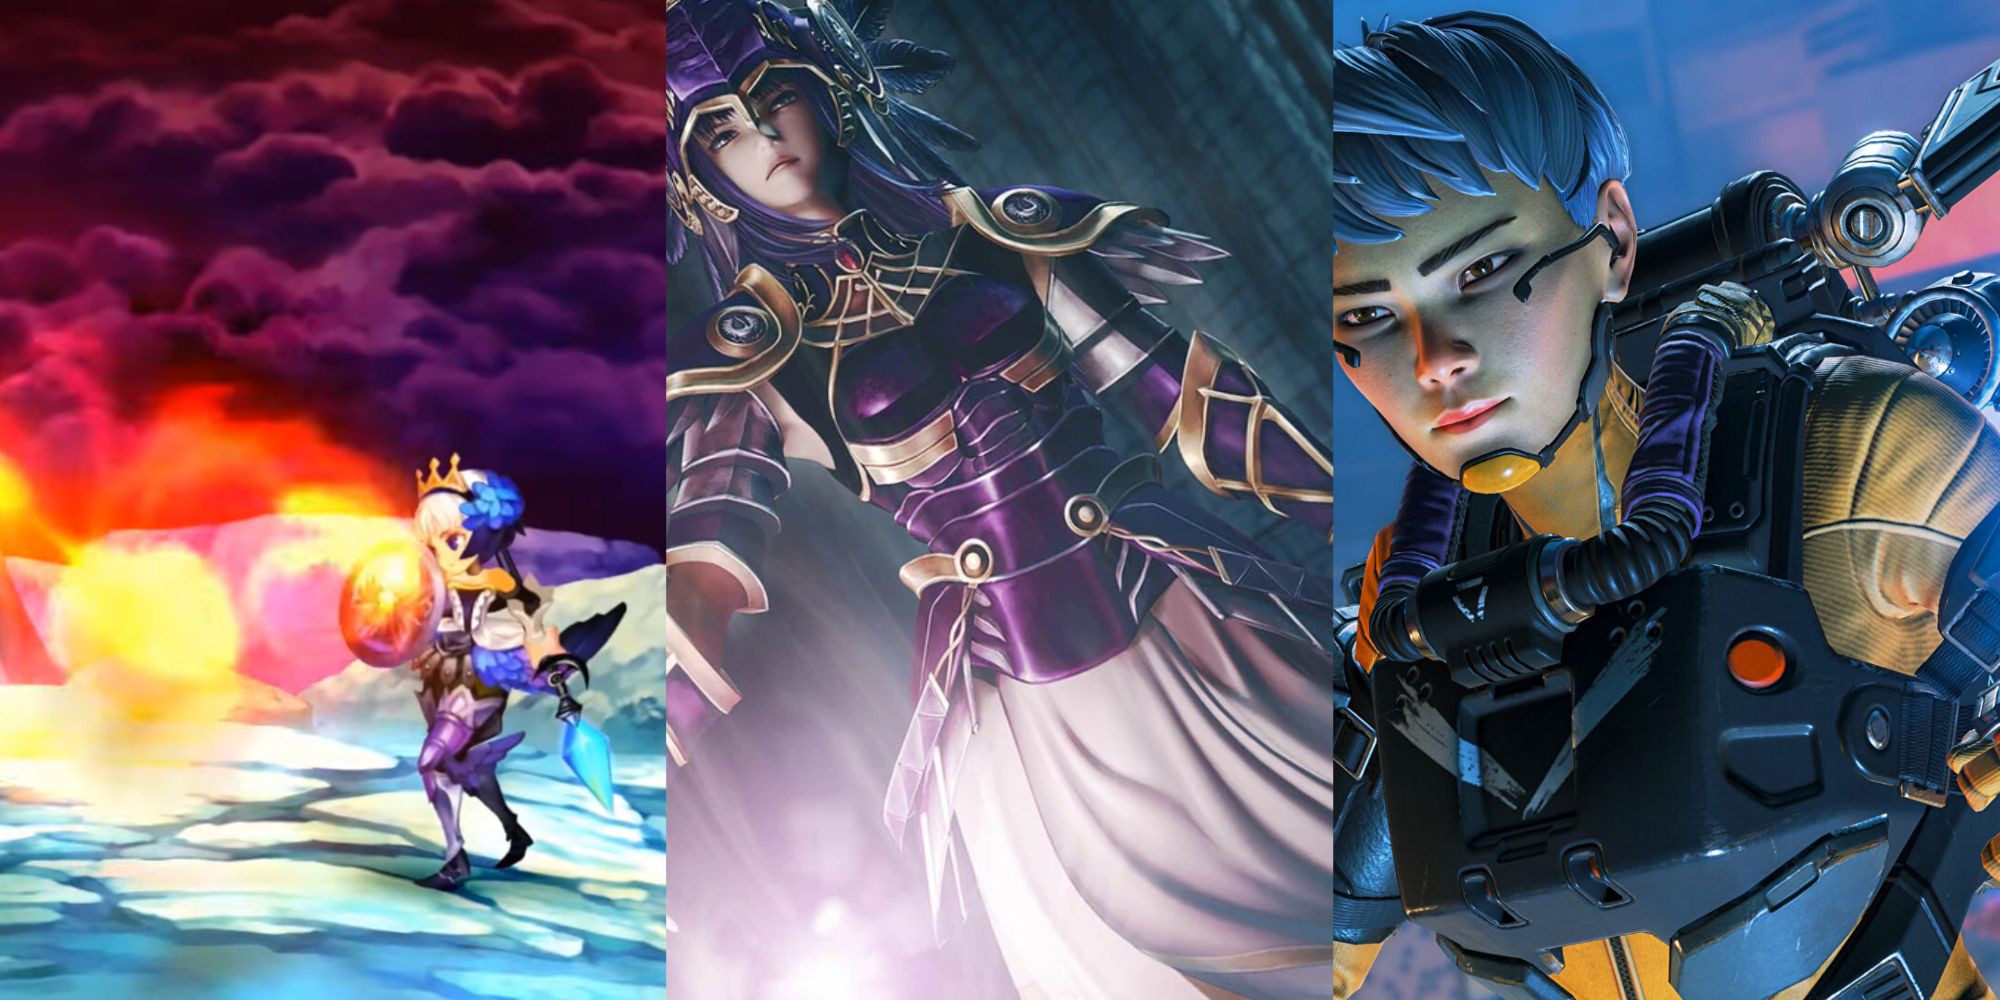 Valkyries in Gaming Featured Gwendolyn in Odin Sphere Hrist from Valkyrie Profile and Valkyrie from Apex Legends